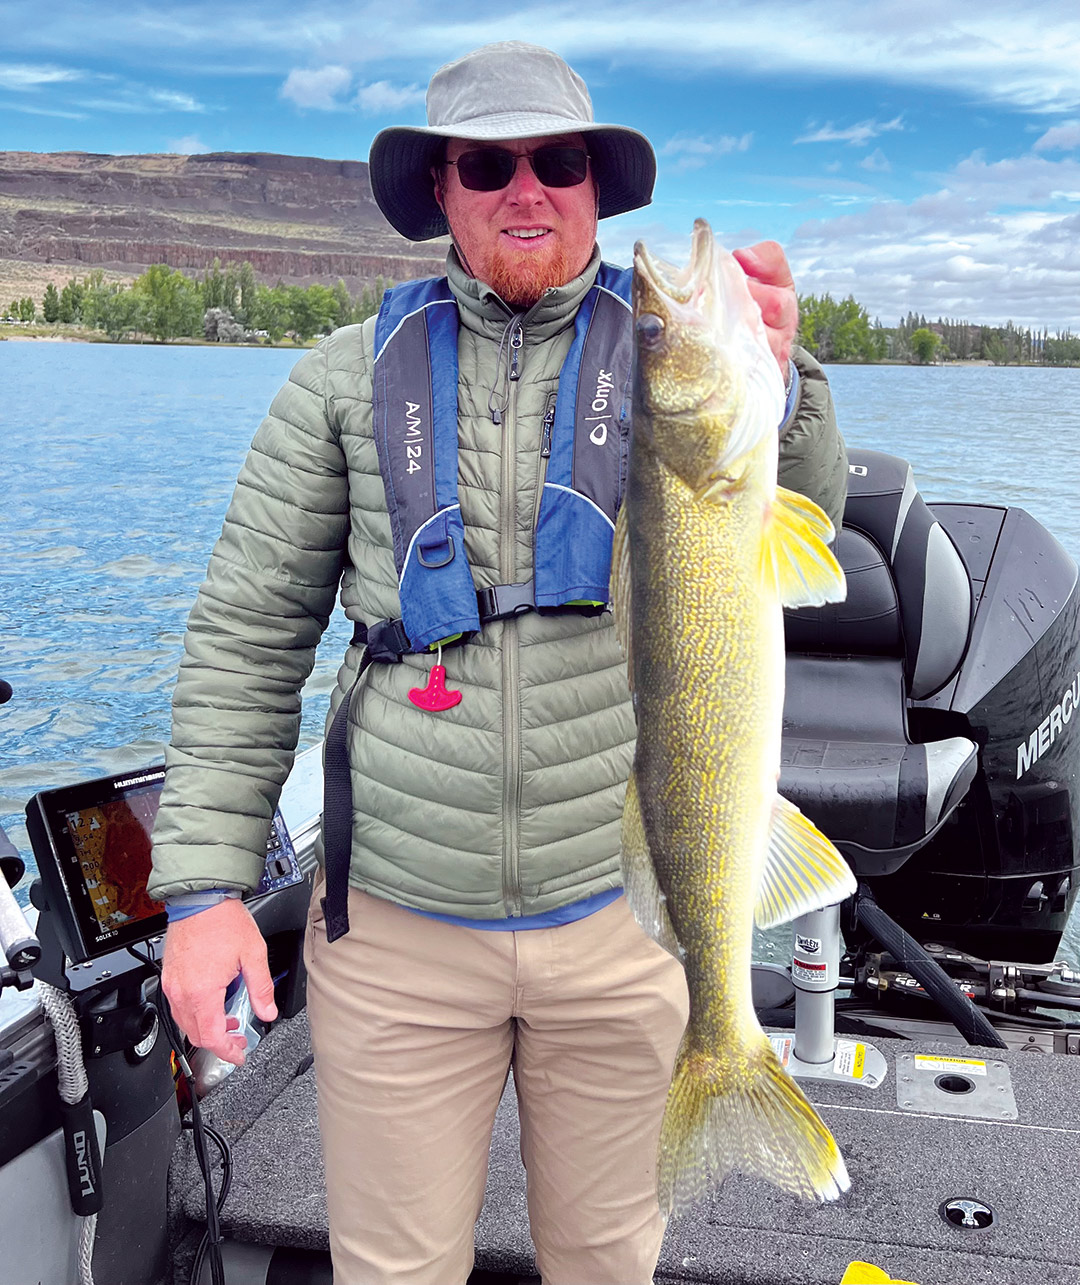 This week's photo is of Joe with a 24 inch walleye that he released immediately after we took the photo